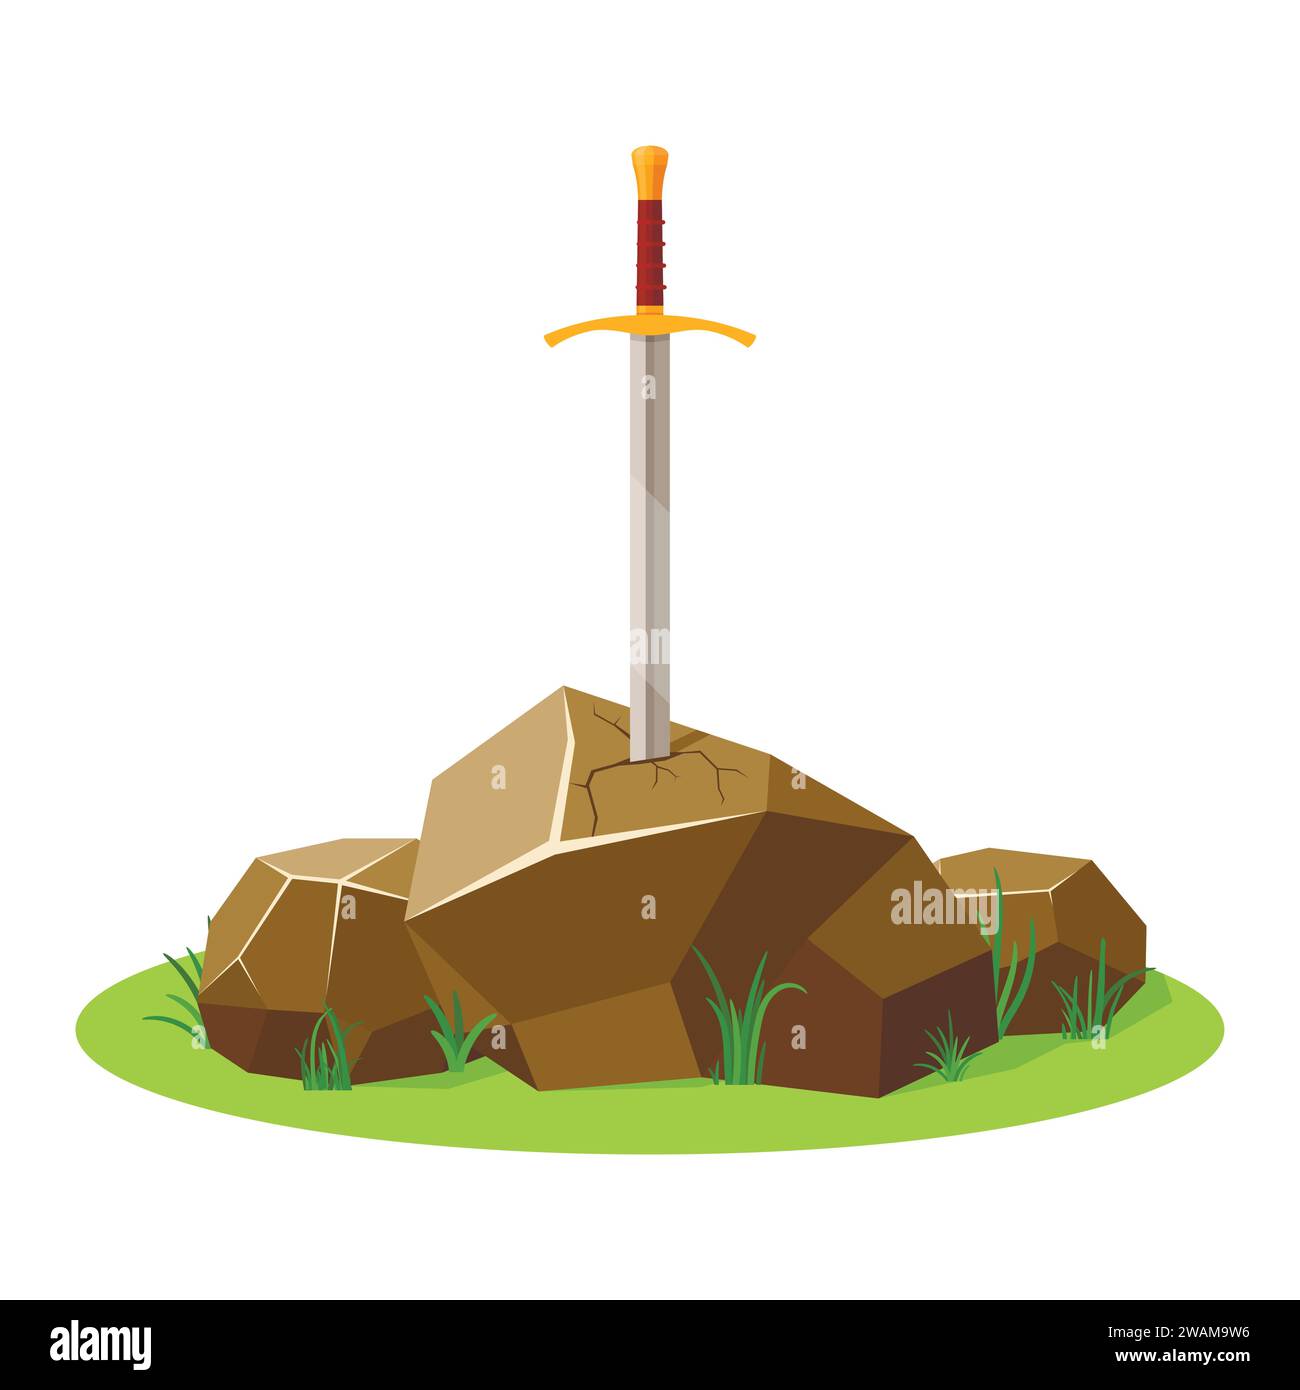 Sword in stone isolated on white background. King Arthur's sword, legendary Excalibur. Medieval weapons and rock. Metaphor for goals, dedication or de Stock Vector